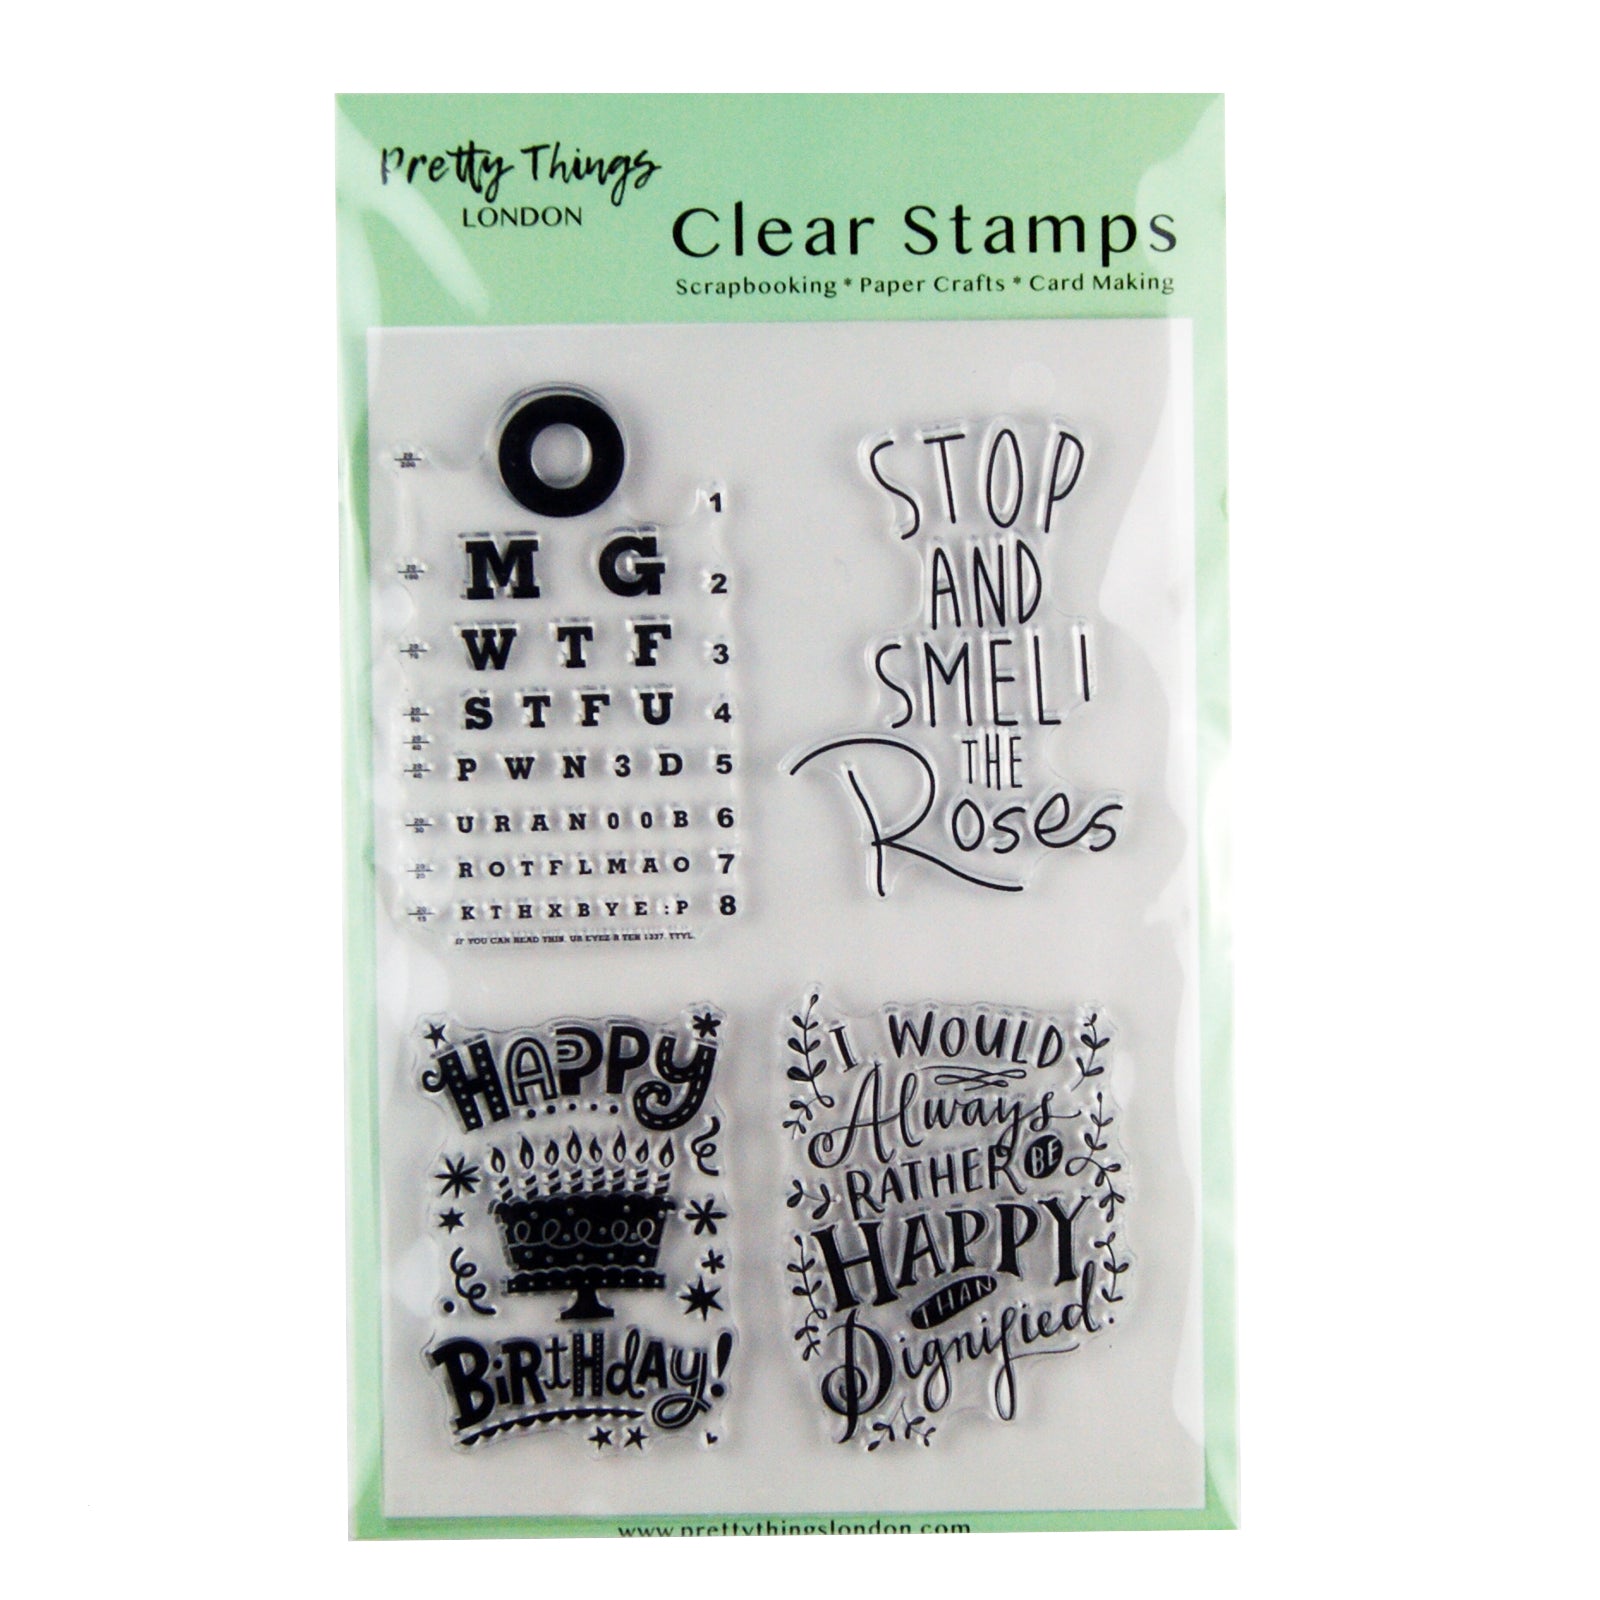 Clear stamp set 4 decorative sentiments paper crafts and card making